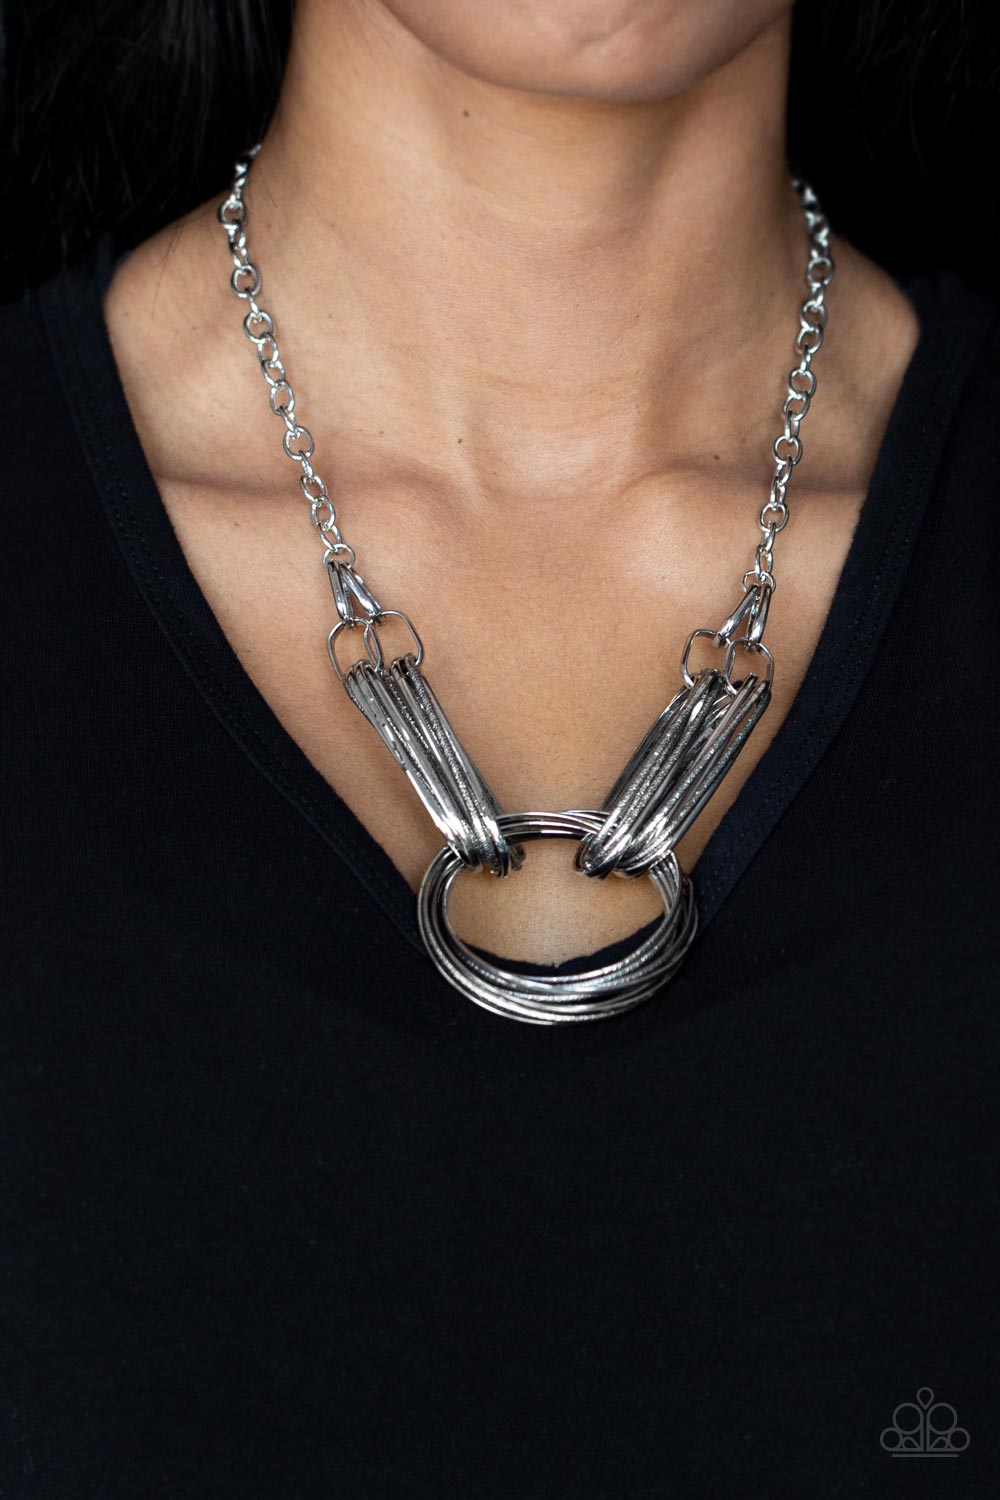 Lip Sync Links - Silver Paparazzi Necklace